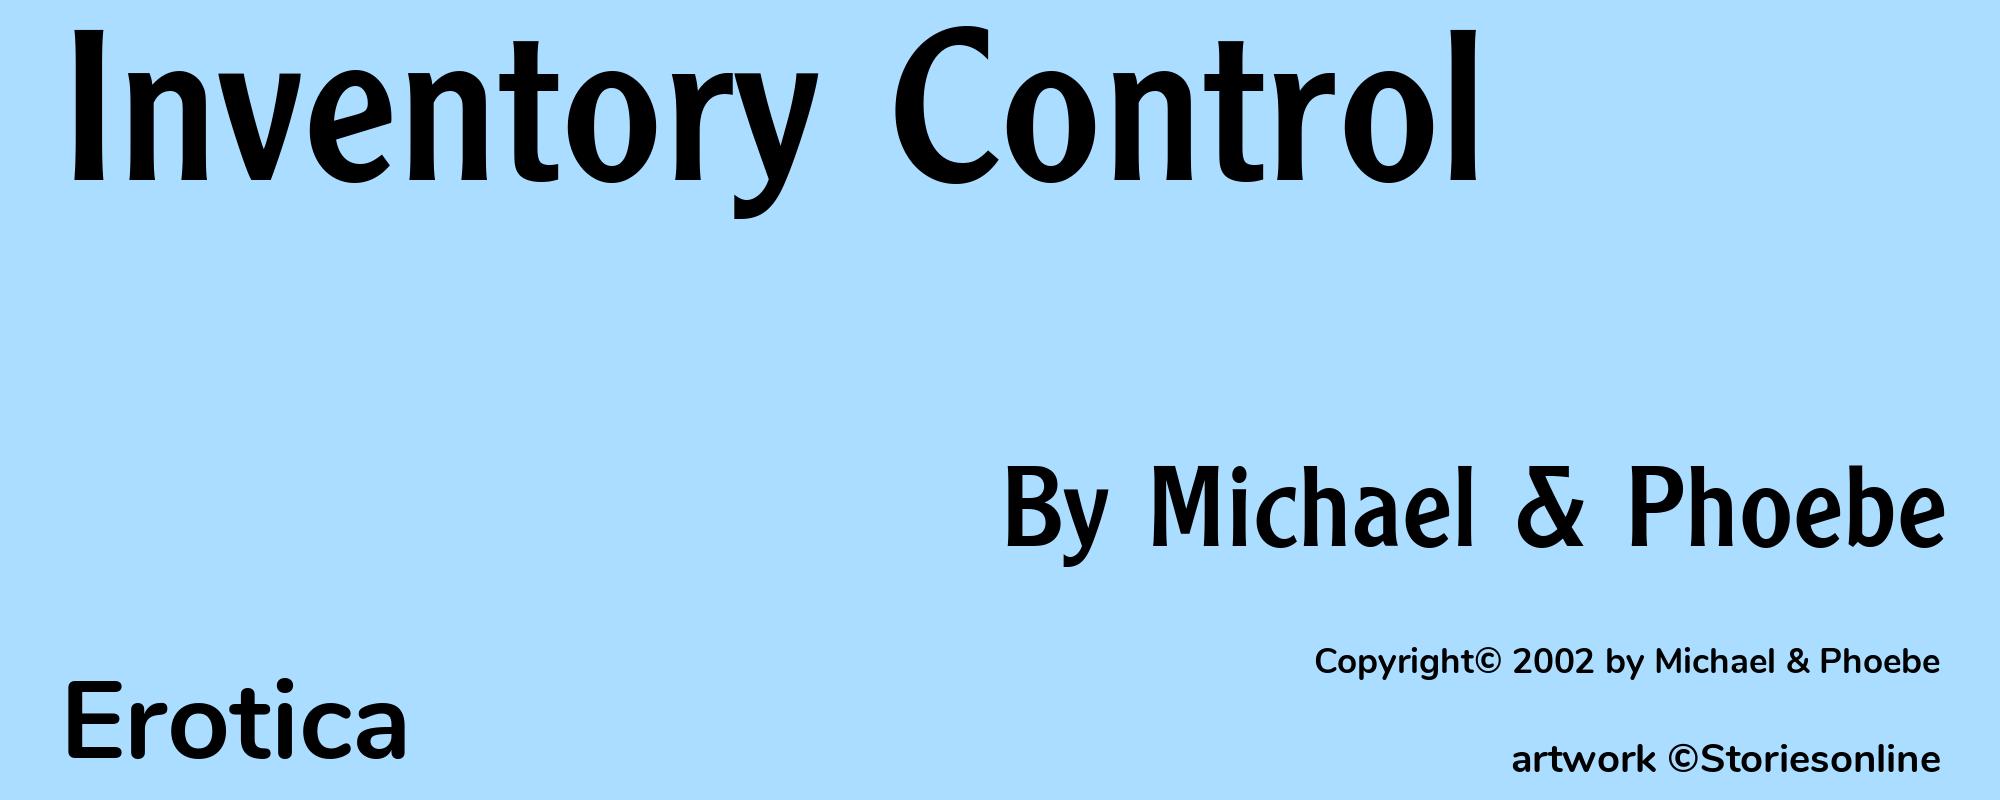 Inventory Control - Cover